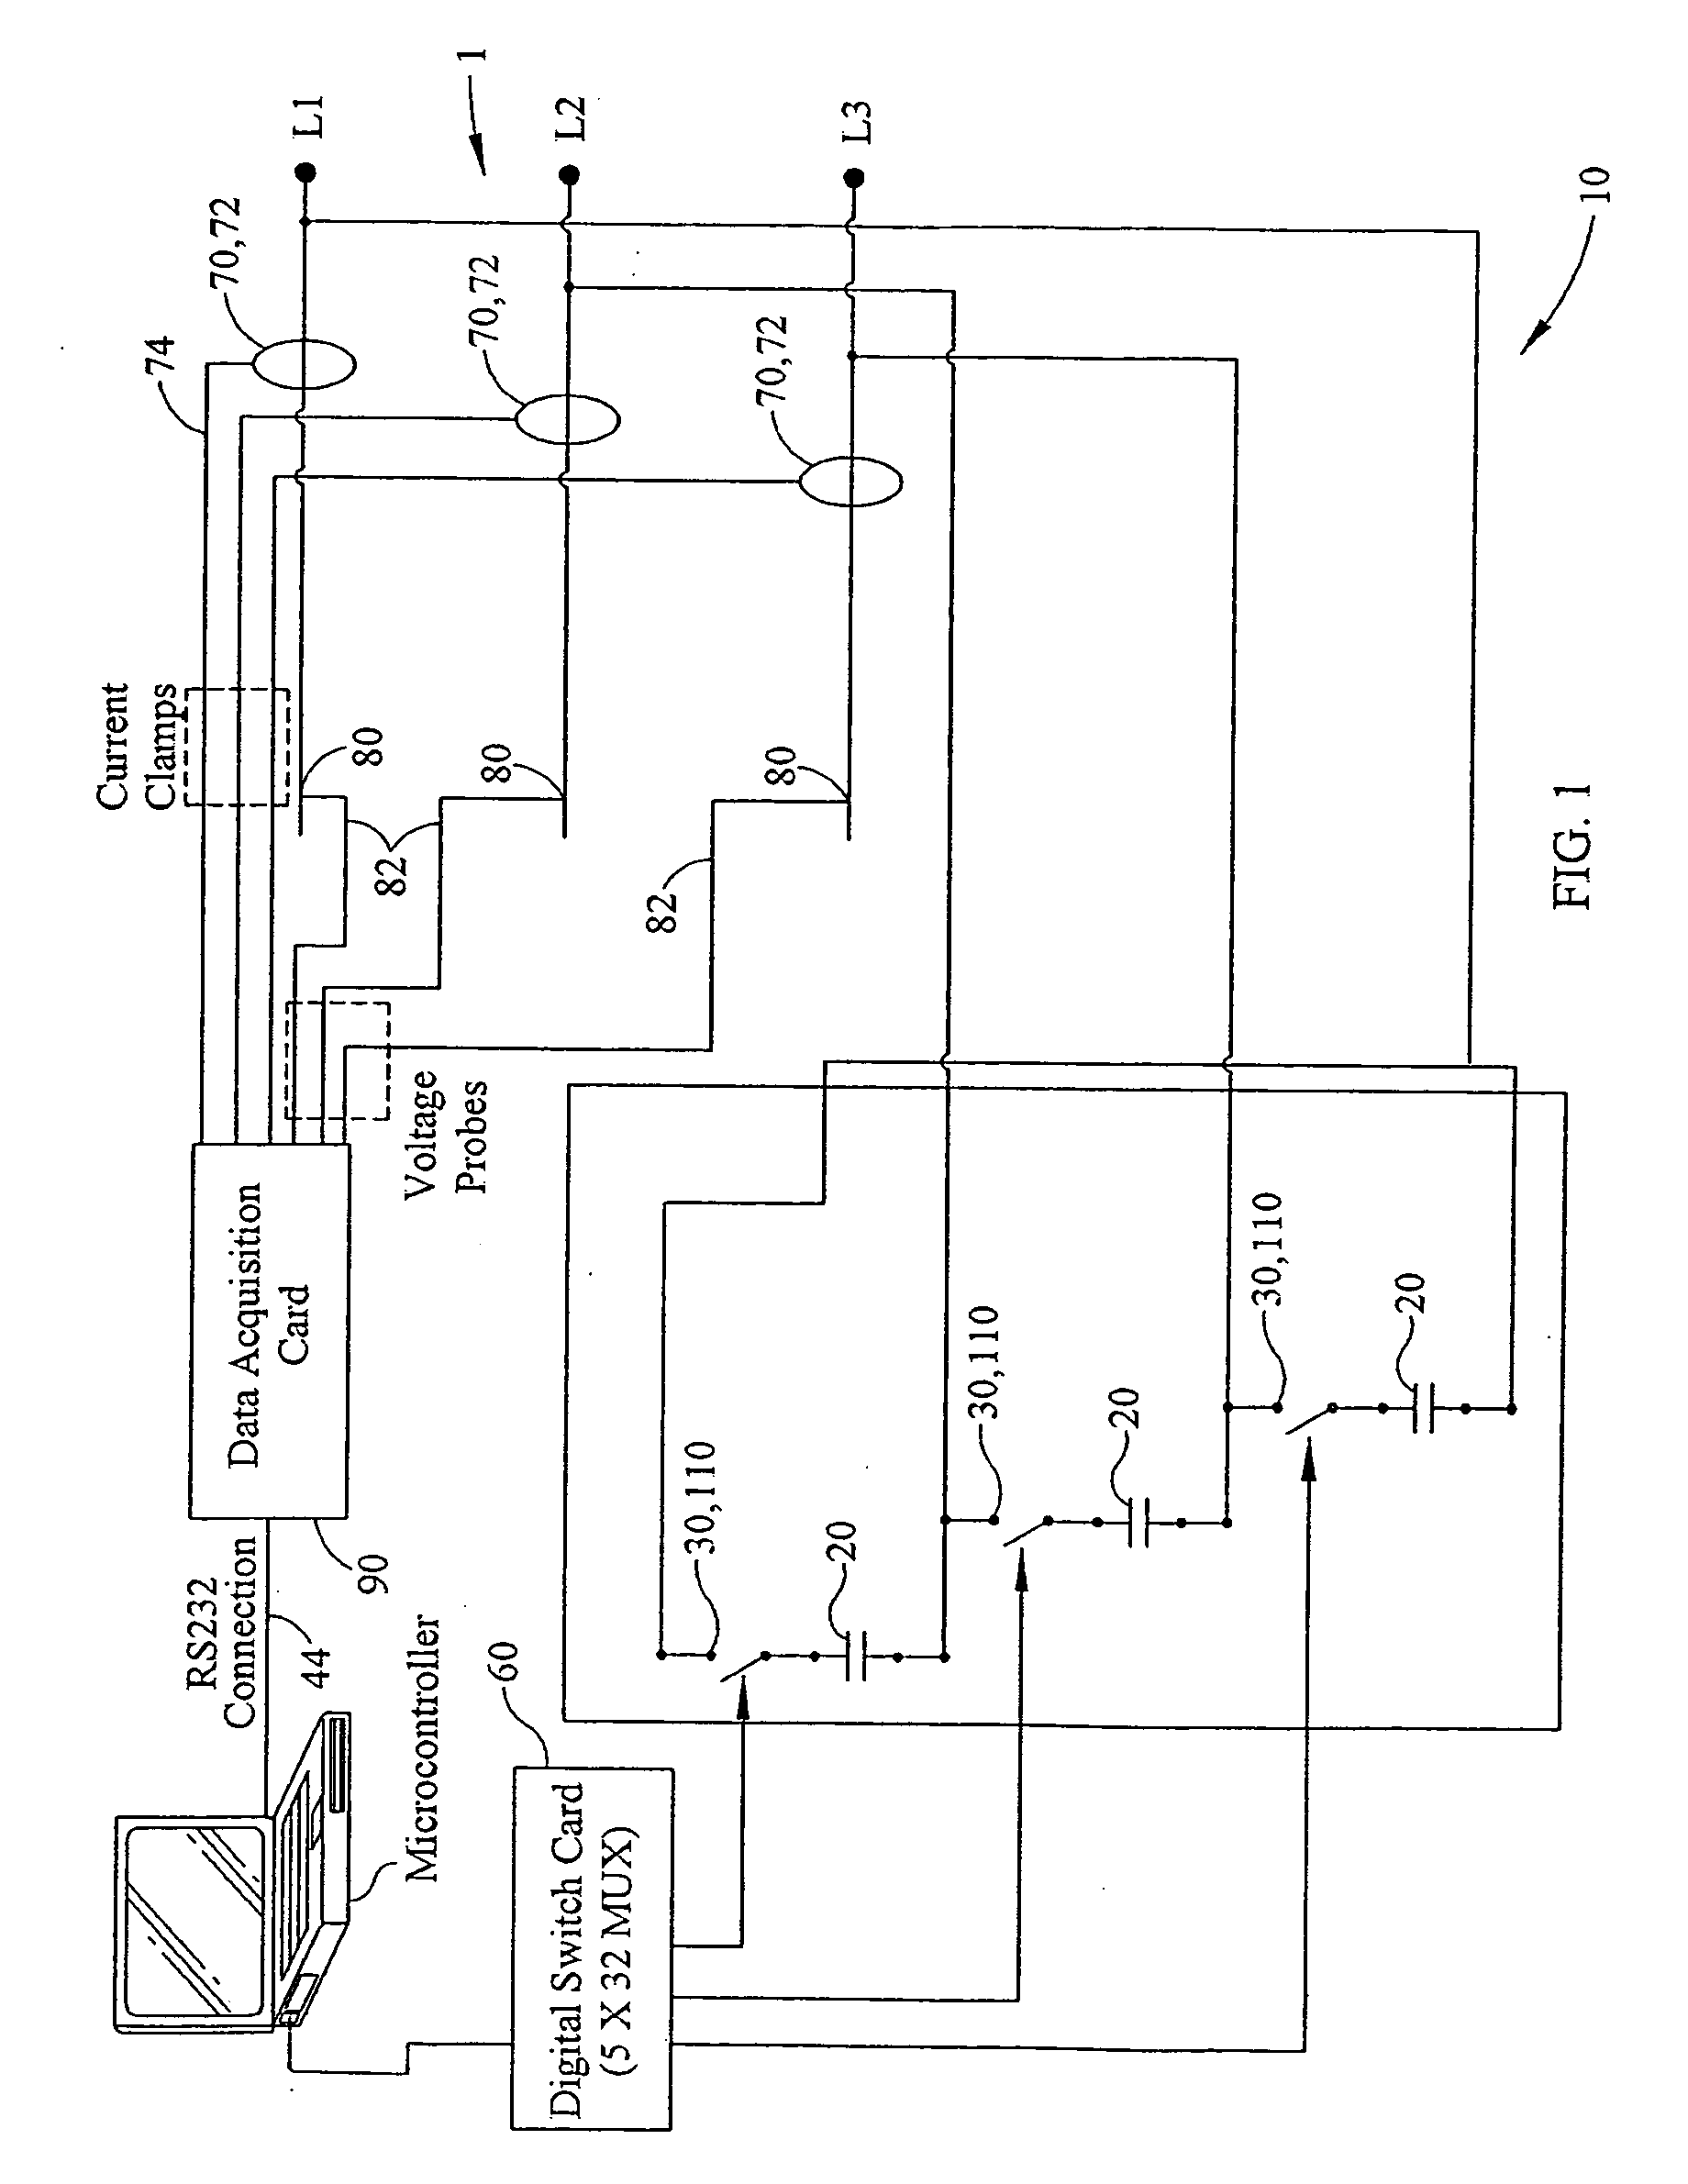 Power Factor Correction Analysis System and Method